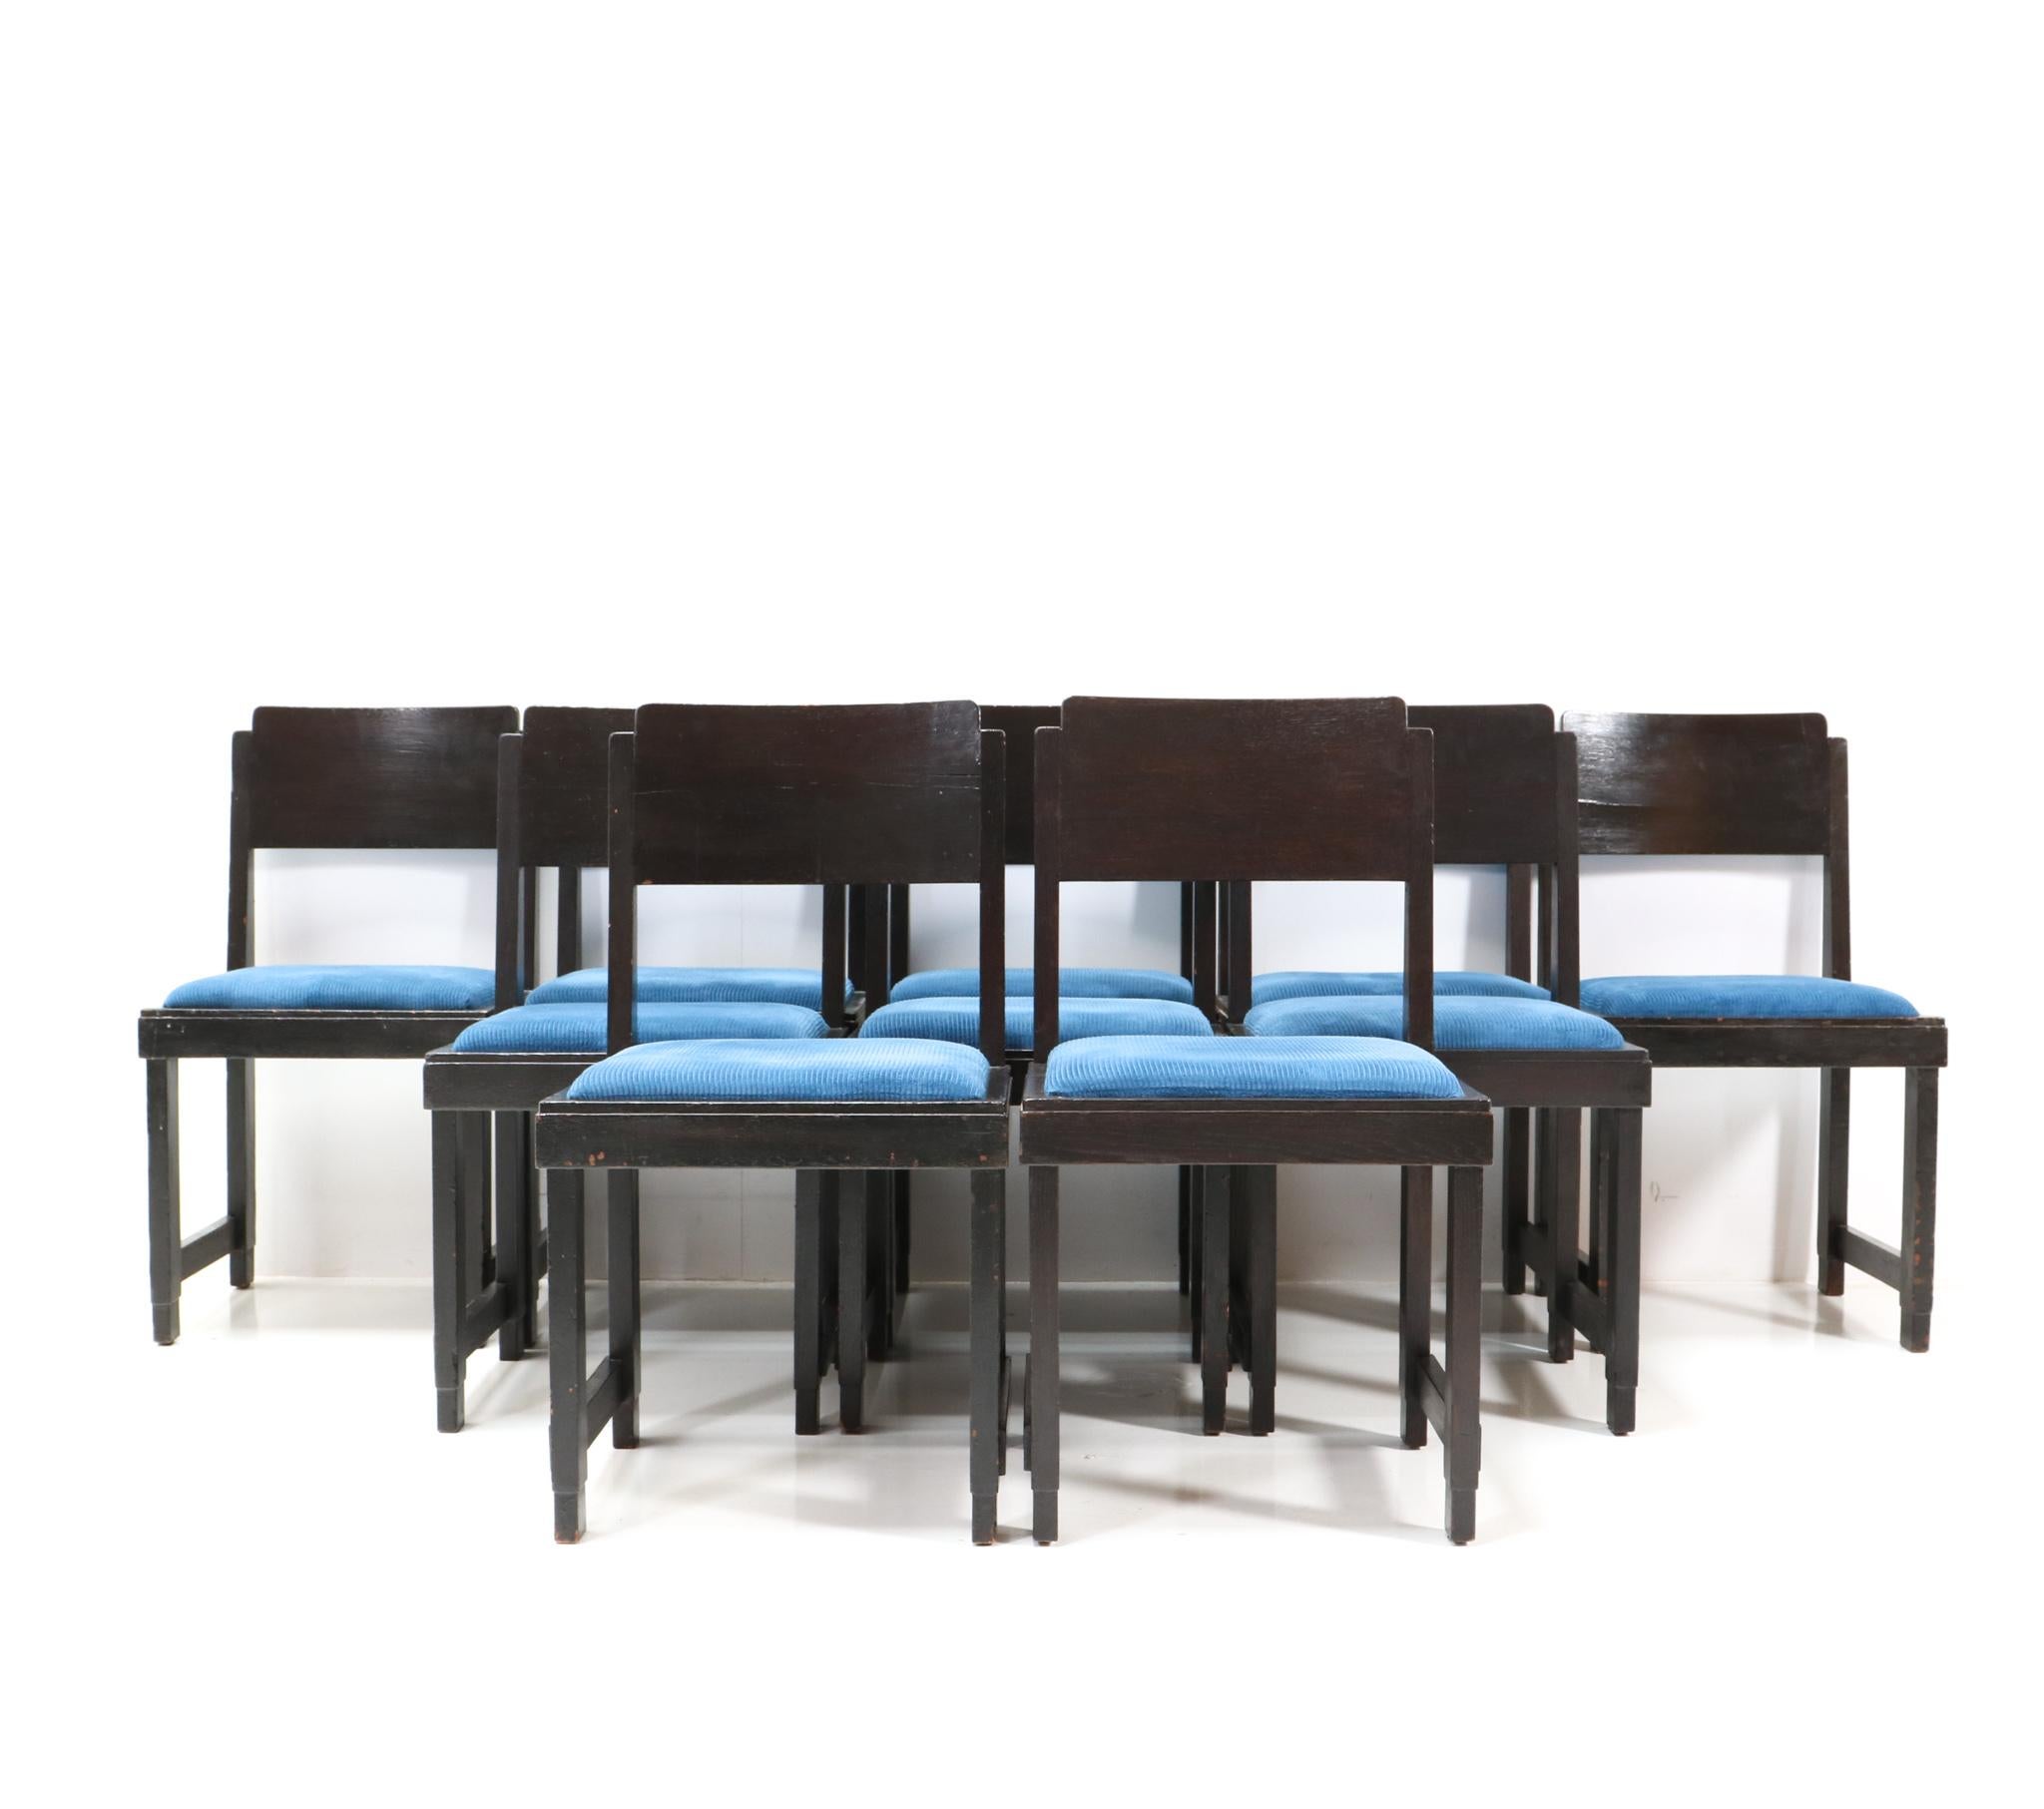 Lacquered Set of Ten Art Deco Modernist Dining Room Chairs by Frits Spanjaard, 1920s For Sale